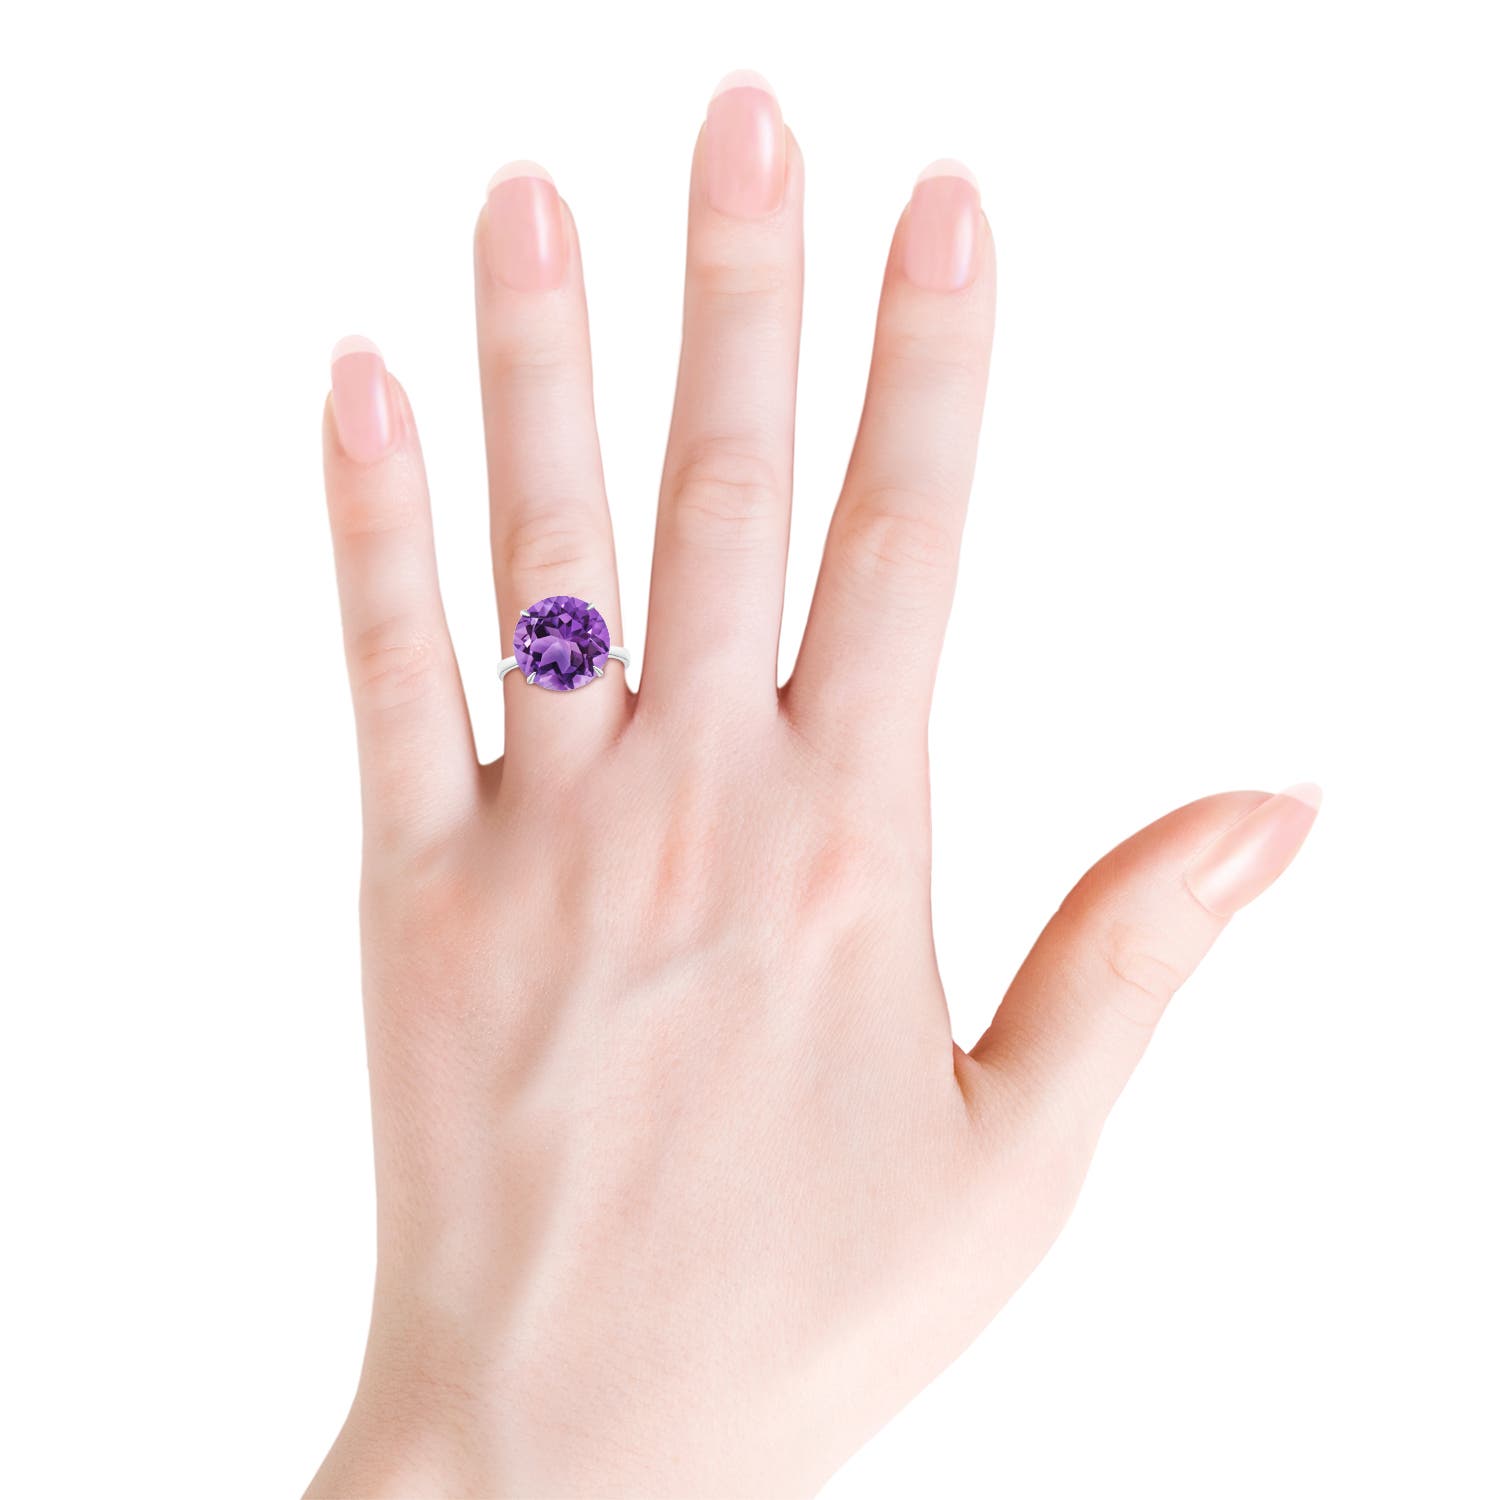 AA - Amethyst / 7.2 CT / 14 KT White Gold